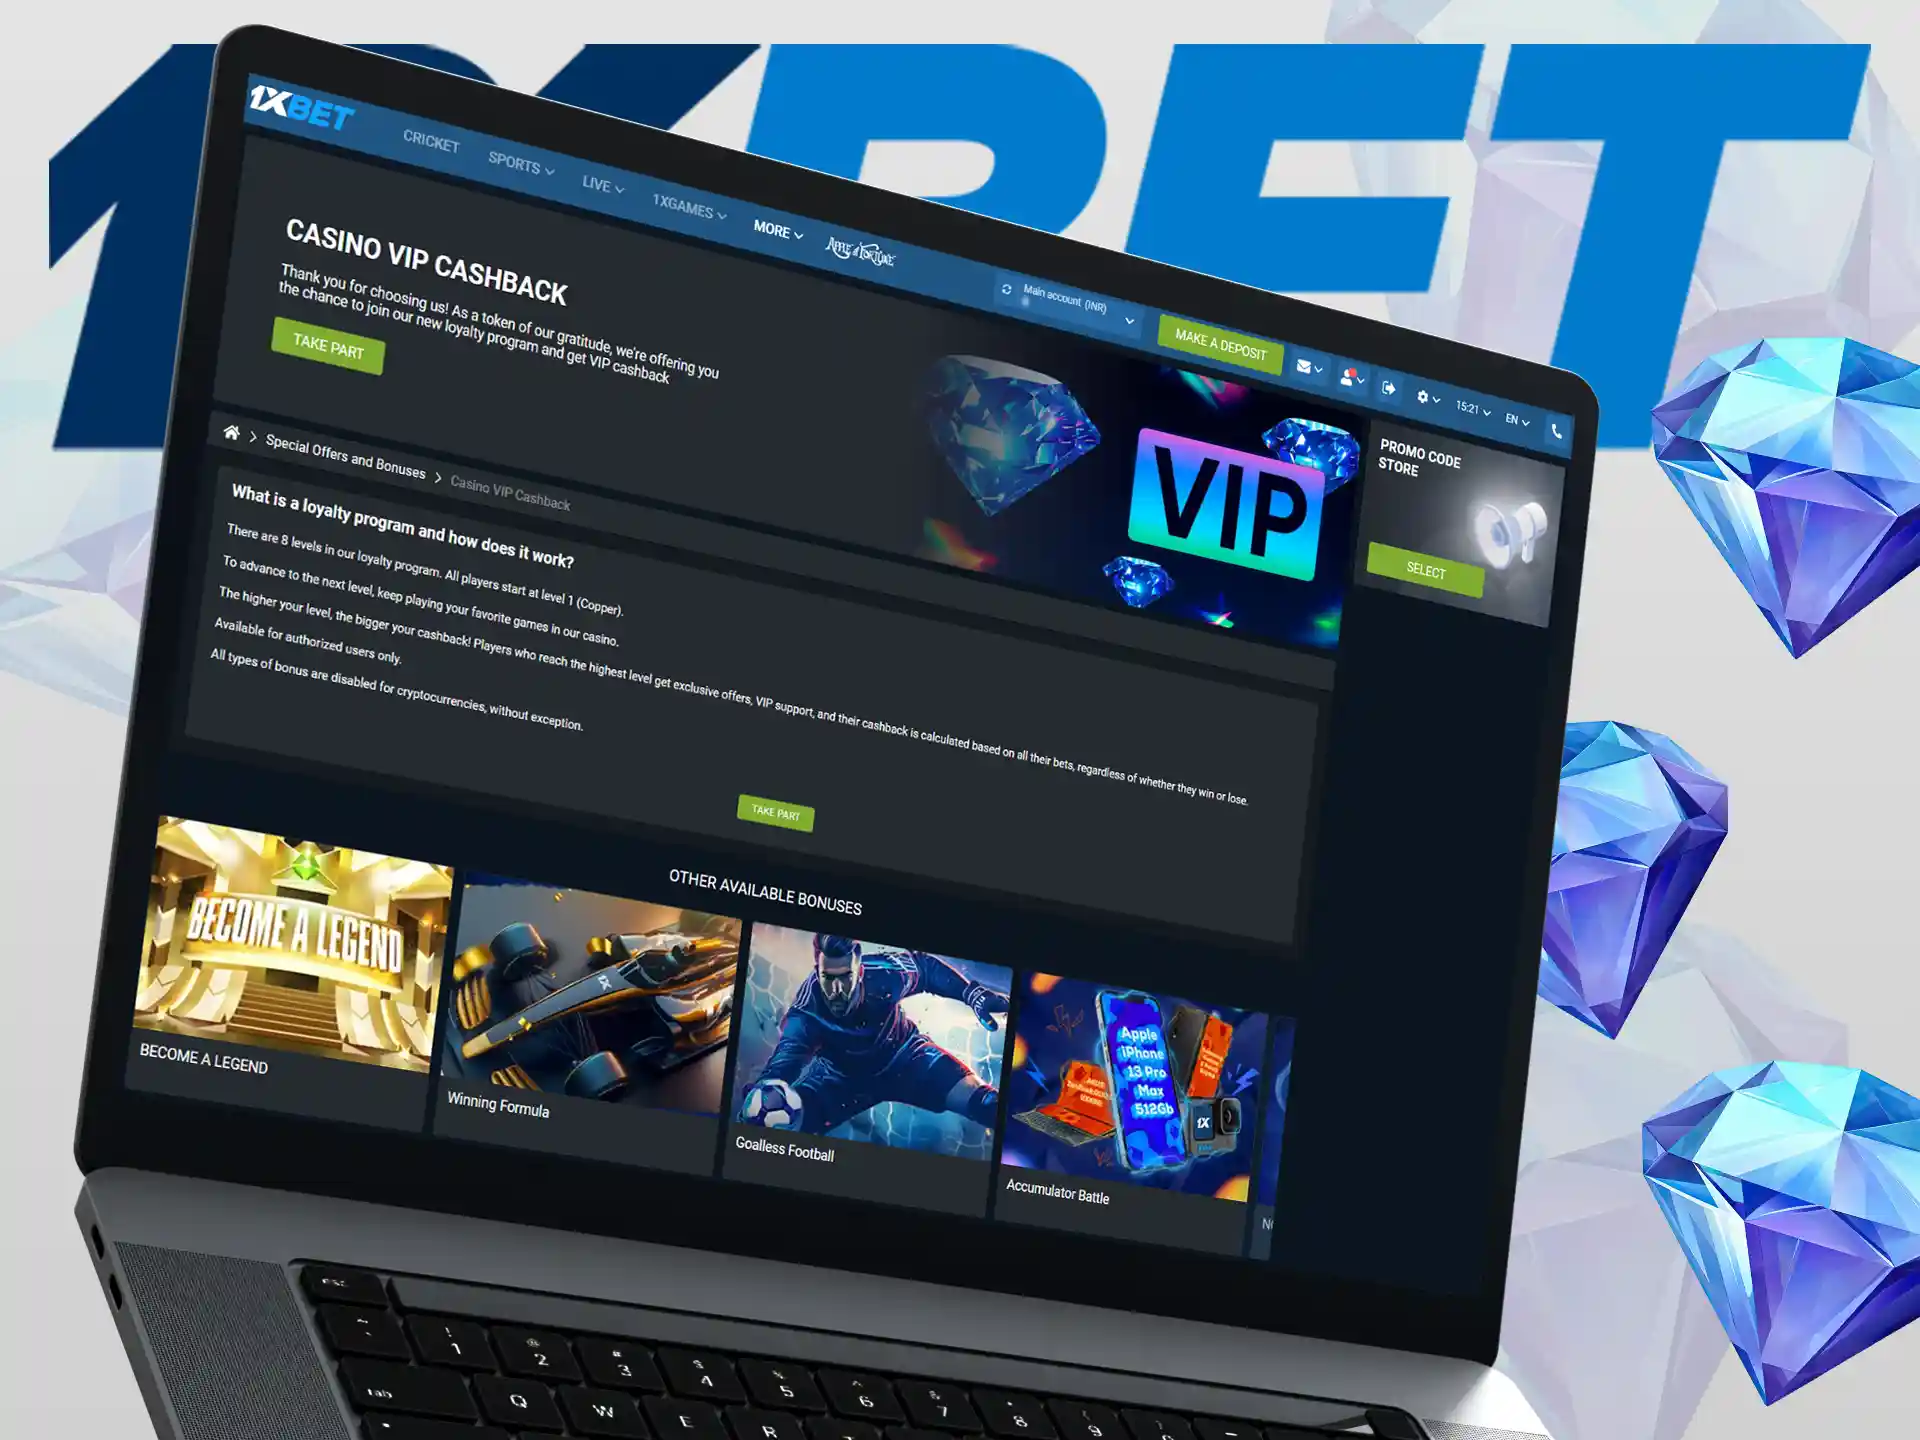 Reach the VIP status and receive cashback from your gambling.